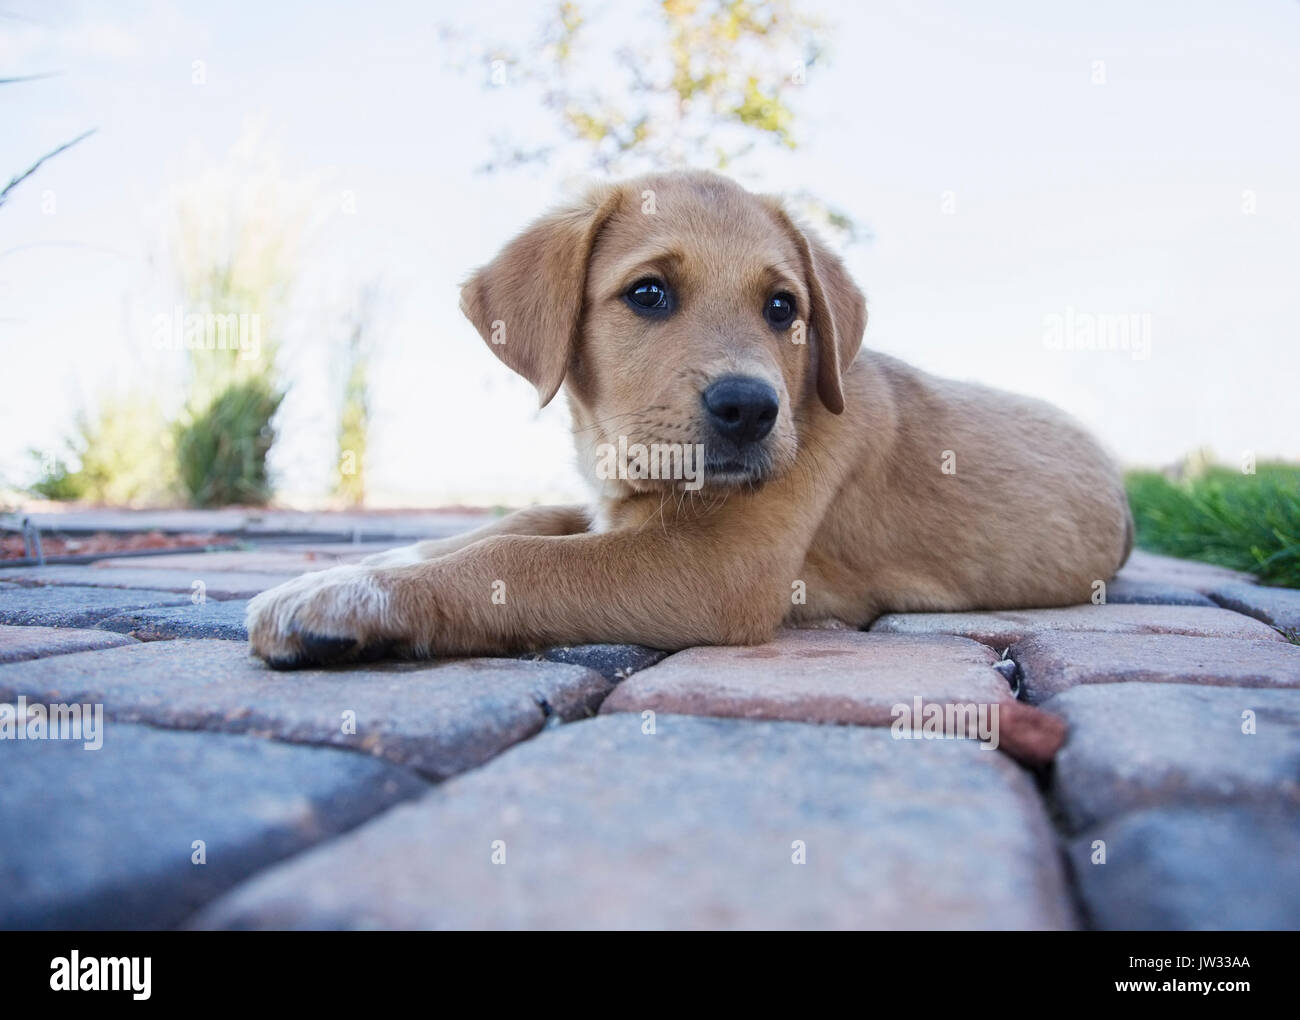 Puppy resting on path Stock Photo